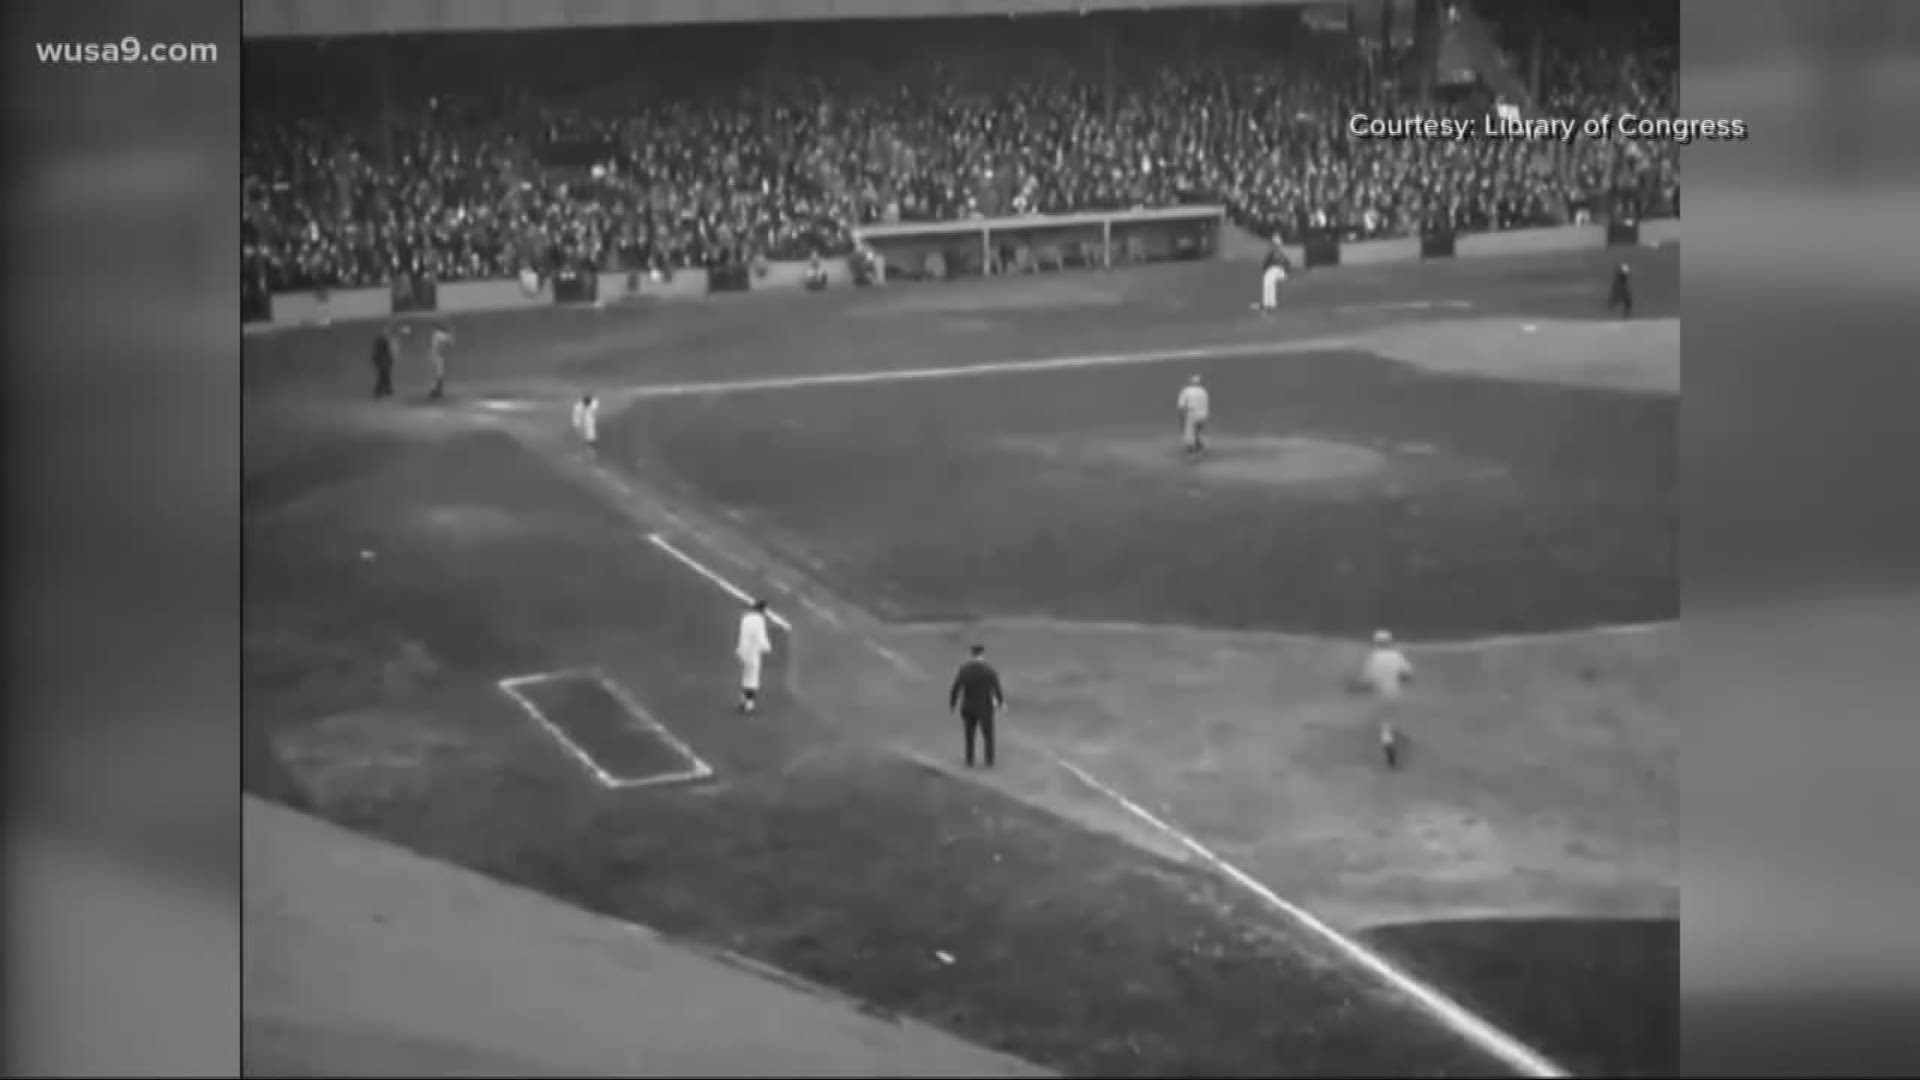 The Washington Senators also were done 3-2 games in 1924 and found a way to win Game 6 and 7 to win the World Series.